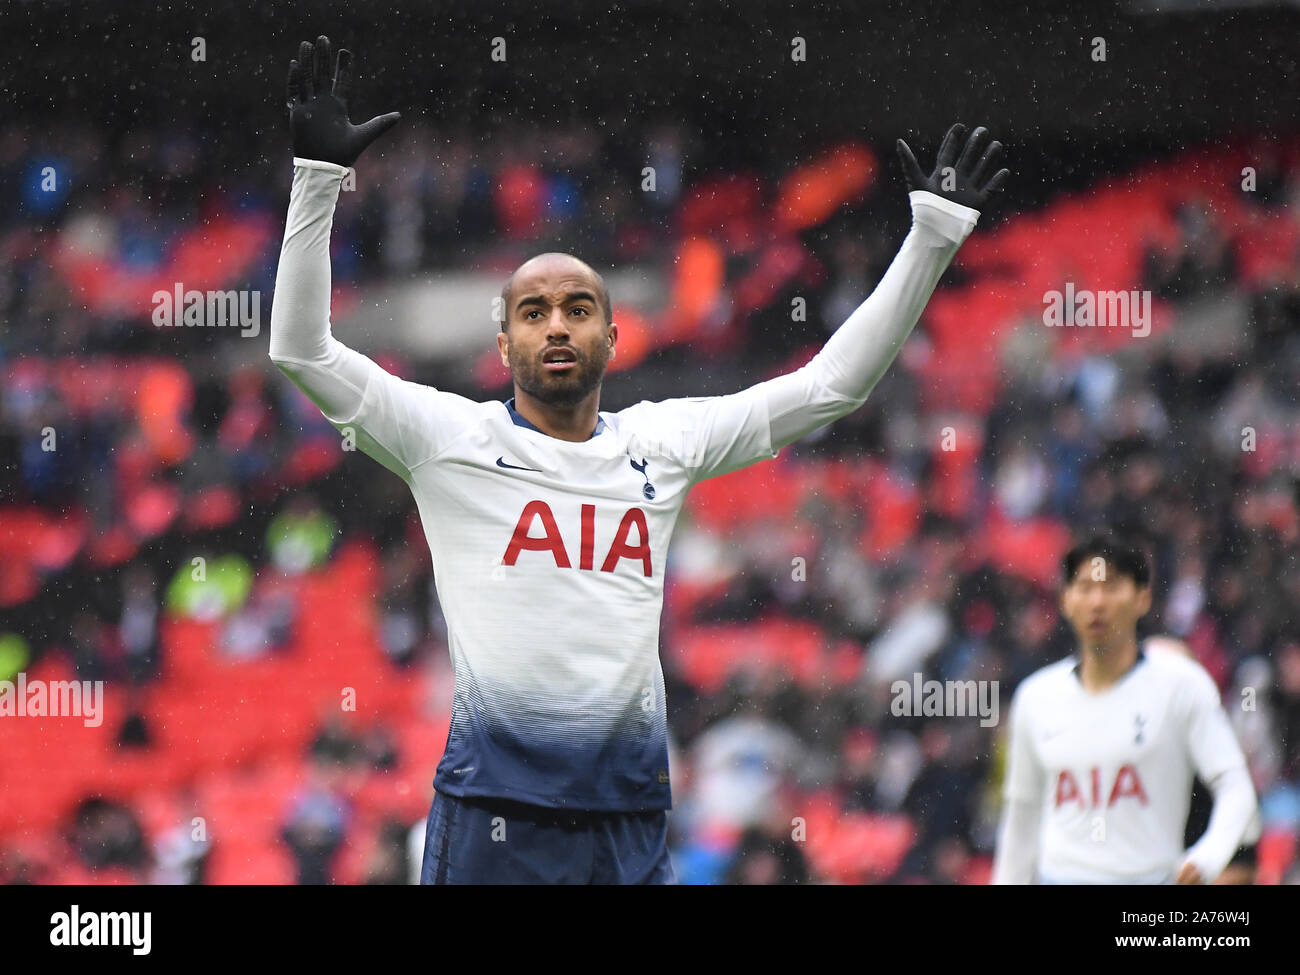 LONDON, ENGLAND - OCTOBER 6, 2018: Lucas Moura of Tottenham pictured during the 2018/19 English Premier League game between Tottenham Hotspur and Cardiff City at Wembley Stadium. Stock Photo